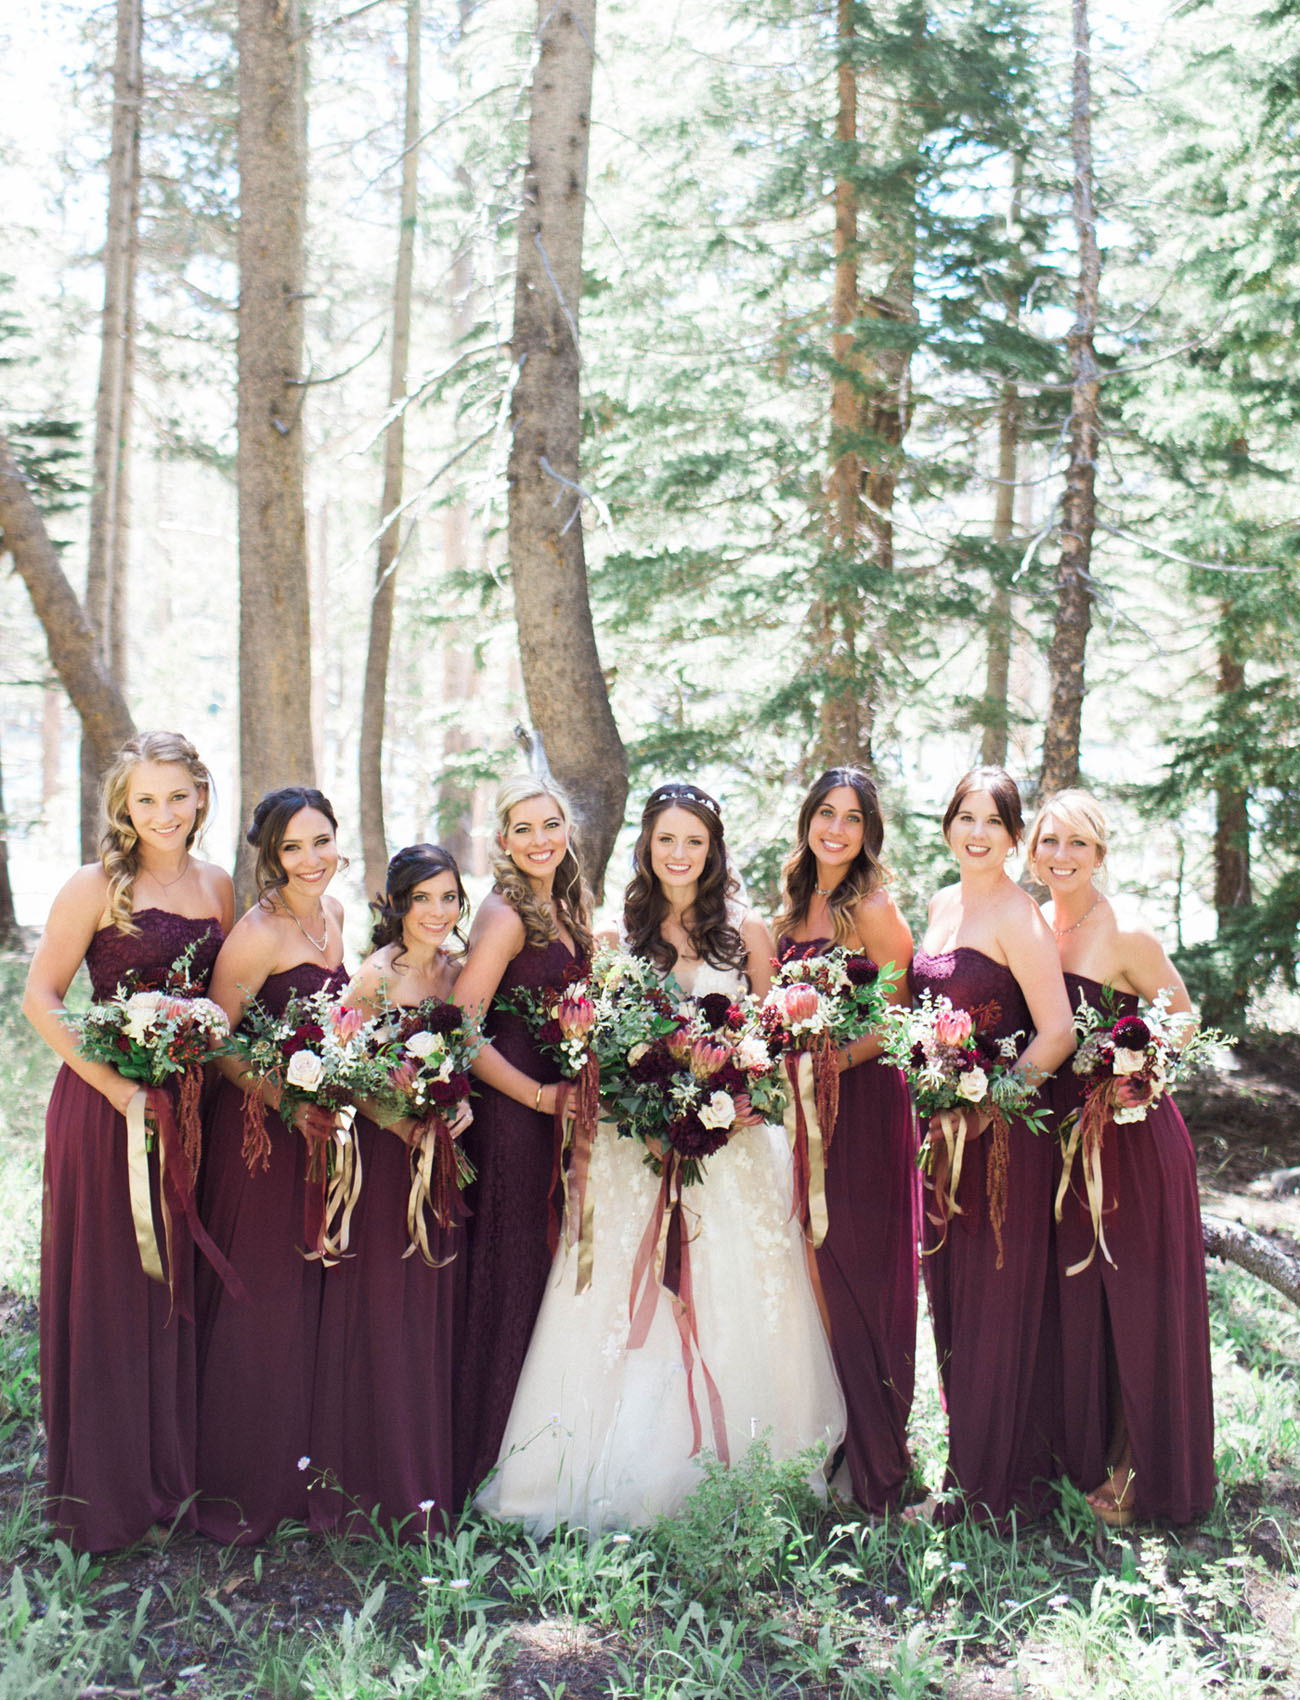 Strapless burgundy bridesmaid dresses with burgundy accent bouquets and ribbon. // Burgundy Bridesmaid Dresses Ideas // http://mysweetengagement.com/burgundy-bridesmaid-dresses/ 